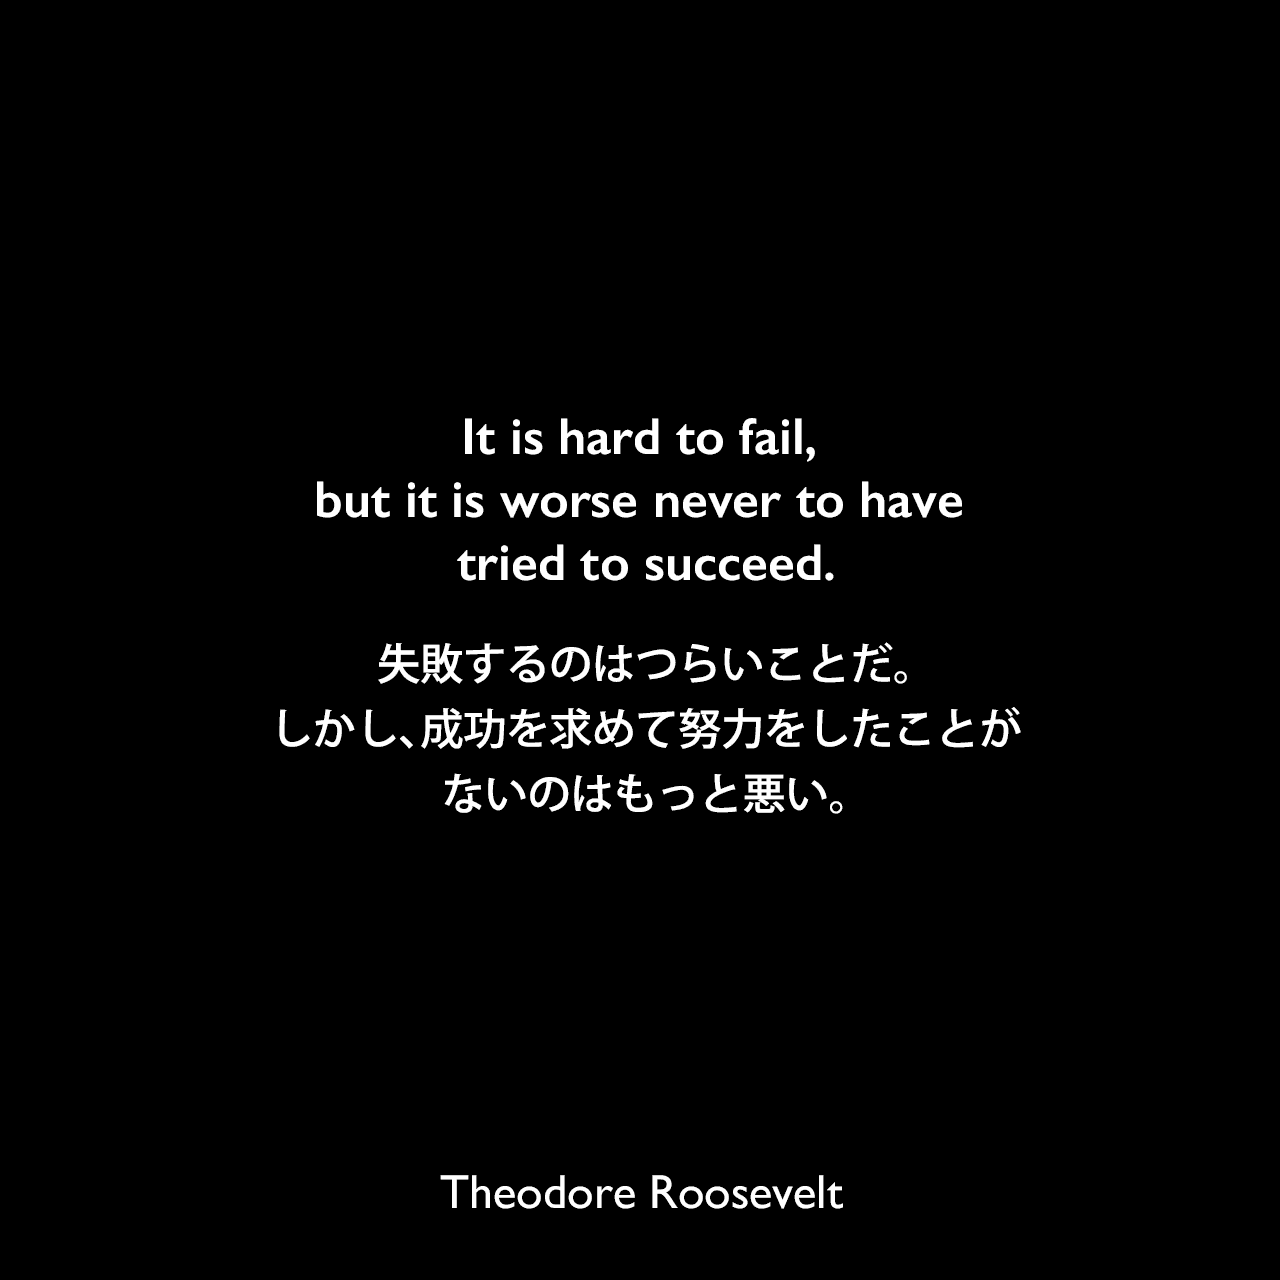 It is hard to fail, but it is worse never to have tried to succeed.失敗するのはつらいことだ。しかし、成功を求めて努力をしたことがないのは、もっと悪い。- 1899年4月10日にイリノイ州シカゴで行われたルーズベルトの演説よりTheodore Roosevelt